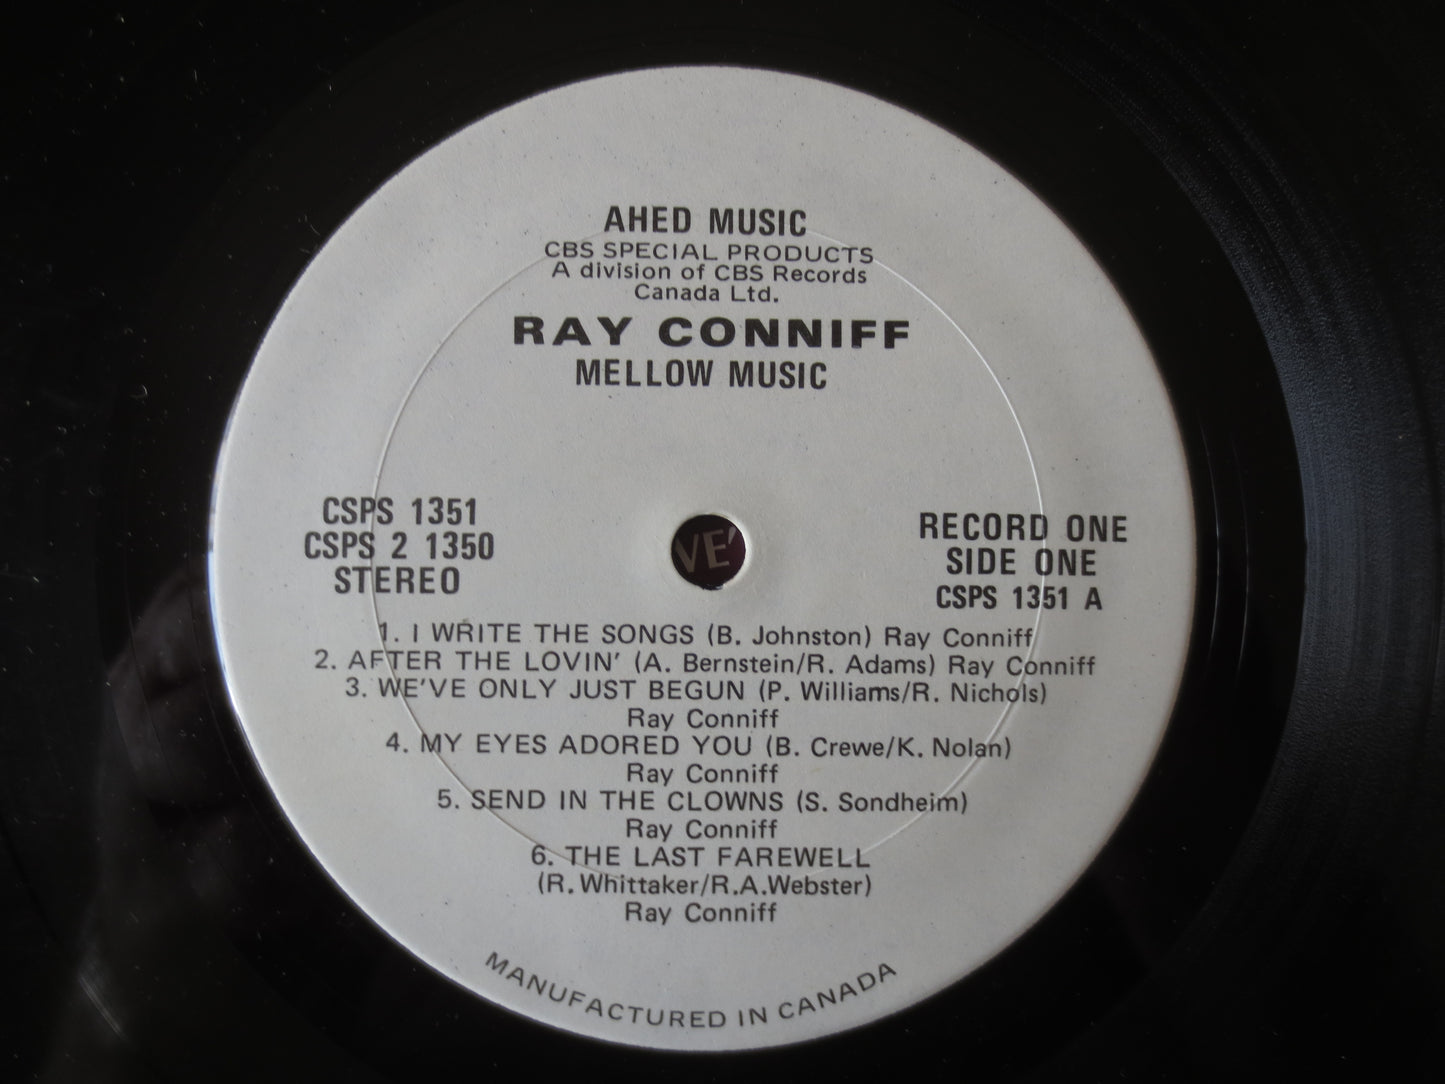 RAY CONNIFF, Mellow MUSIC, Ray Conniff Records, Ray Conniff Albums, Ray Conniff Singers, Vinyl Record, Vinyl, 1979 Records